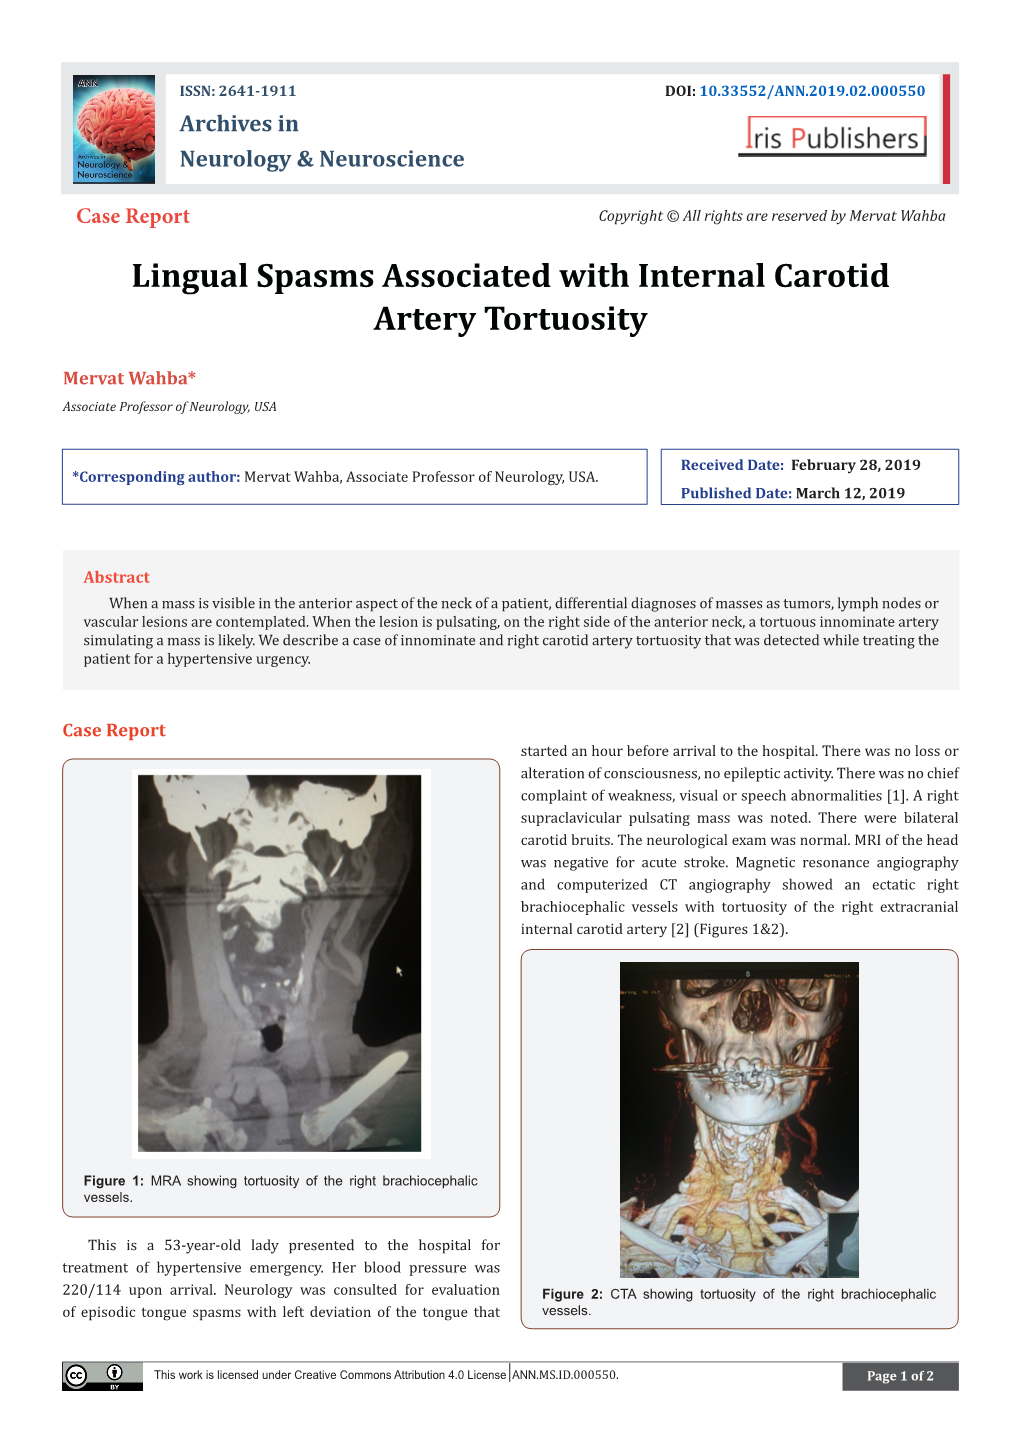 Lingual Spasms Associated with Internal Carotid Artery Tortuosity